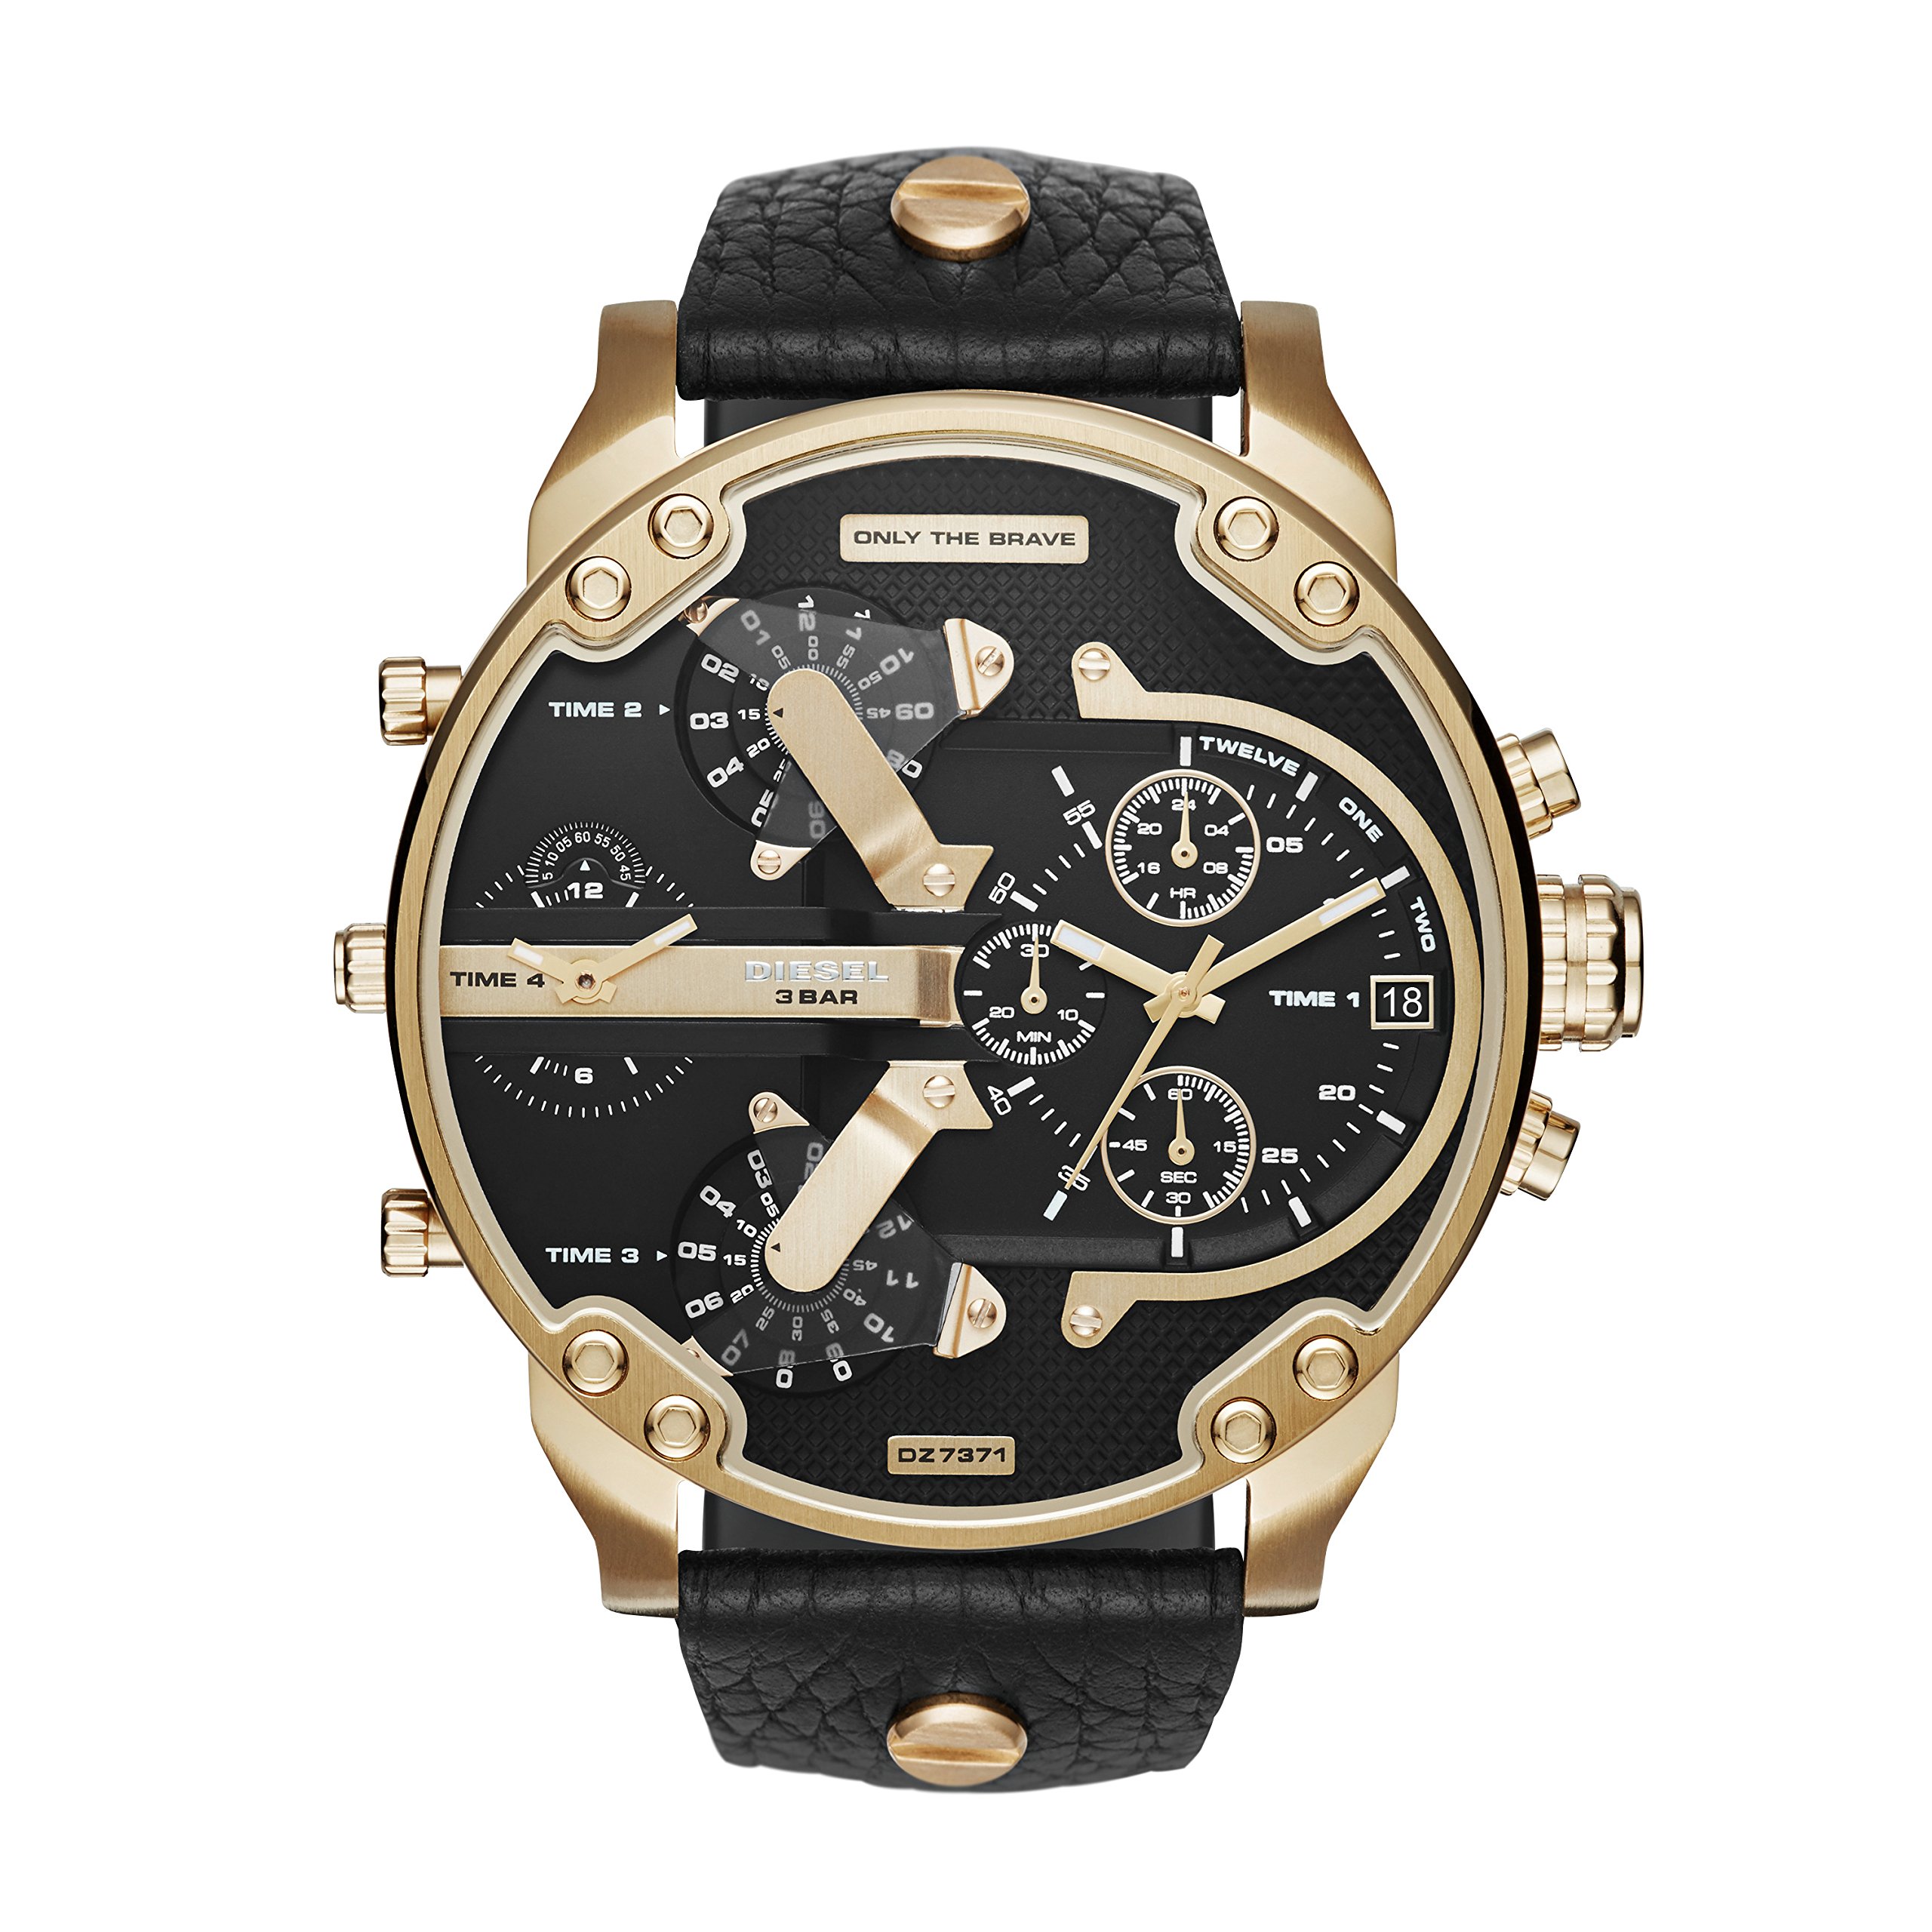 Diesel Men's 57mm Mr. Daddy 2.0 Quartz Stainless Steel and Leather Chronograph Watch, Color: Gold, Black (Model: DZ7371)